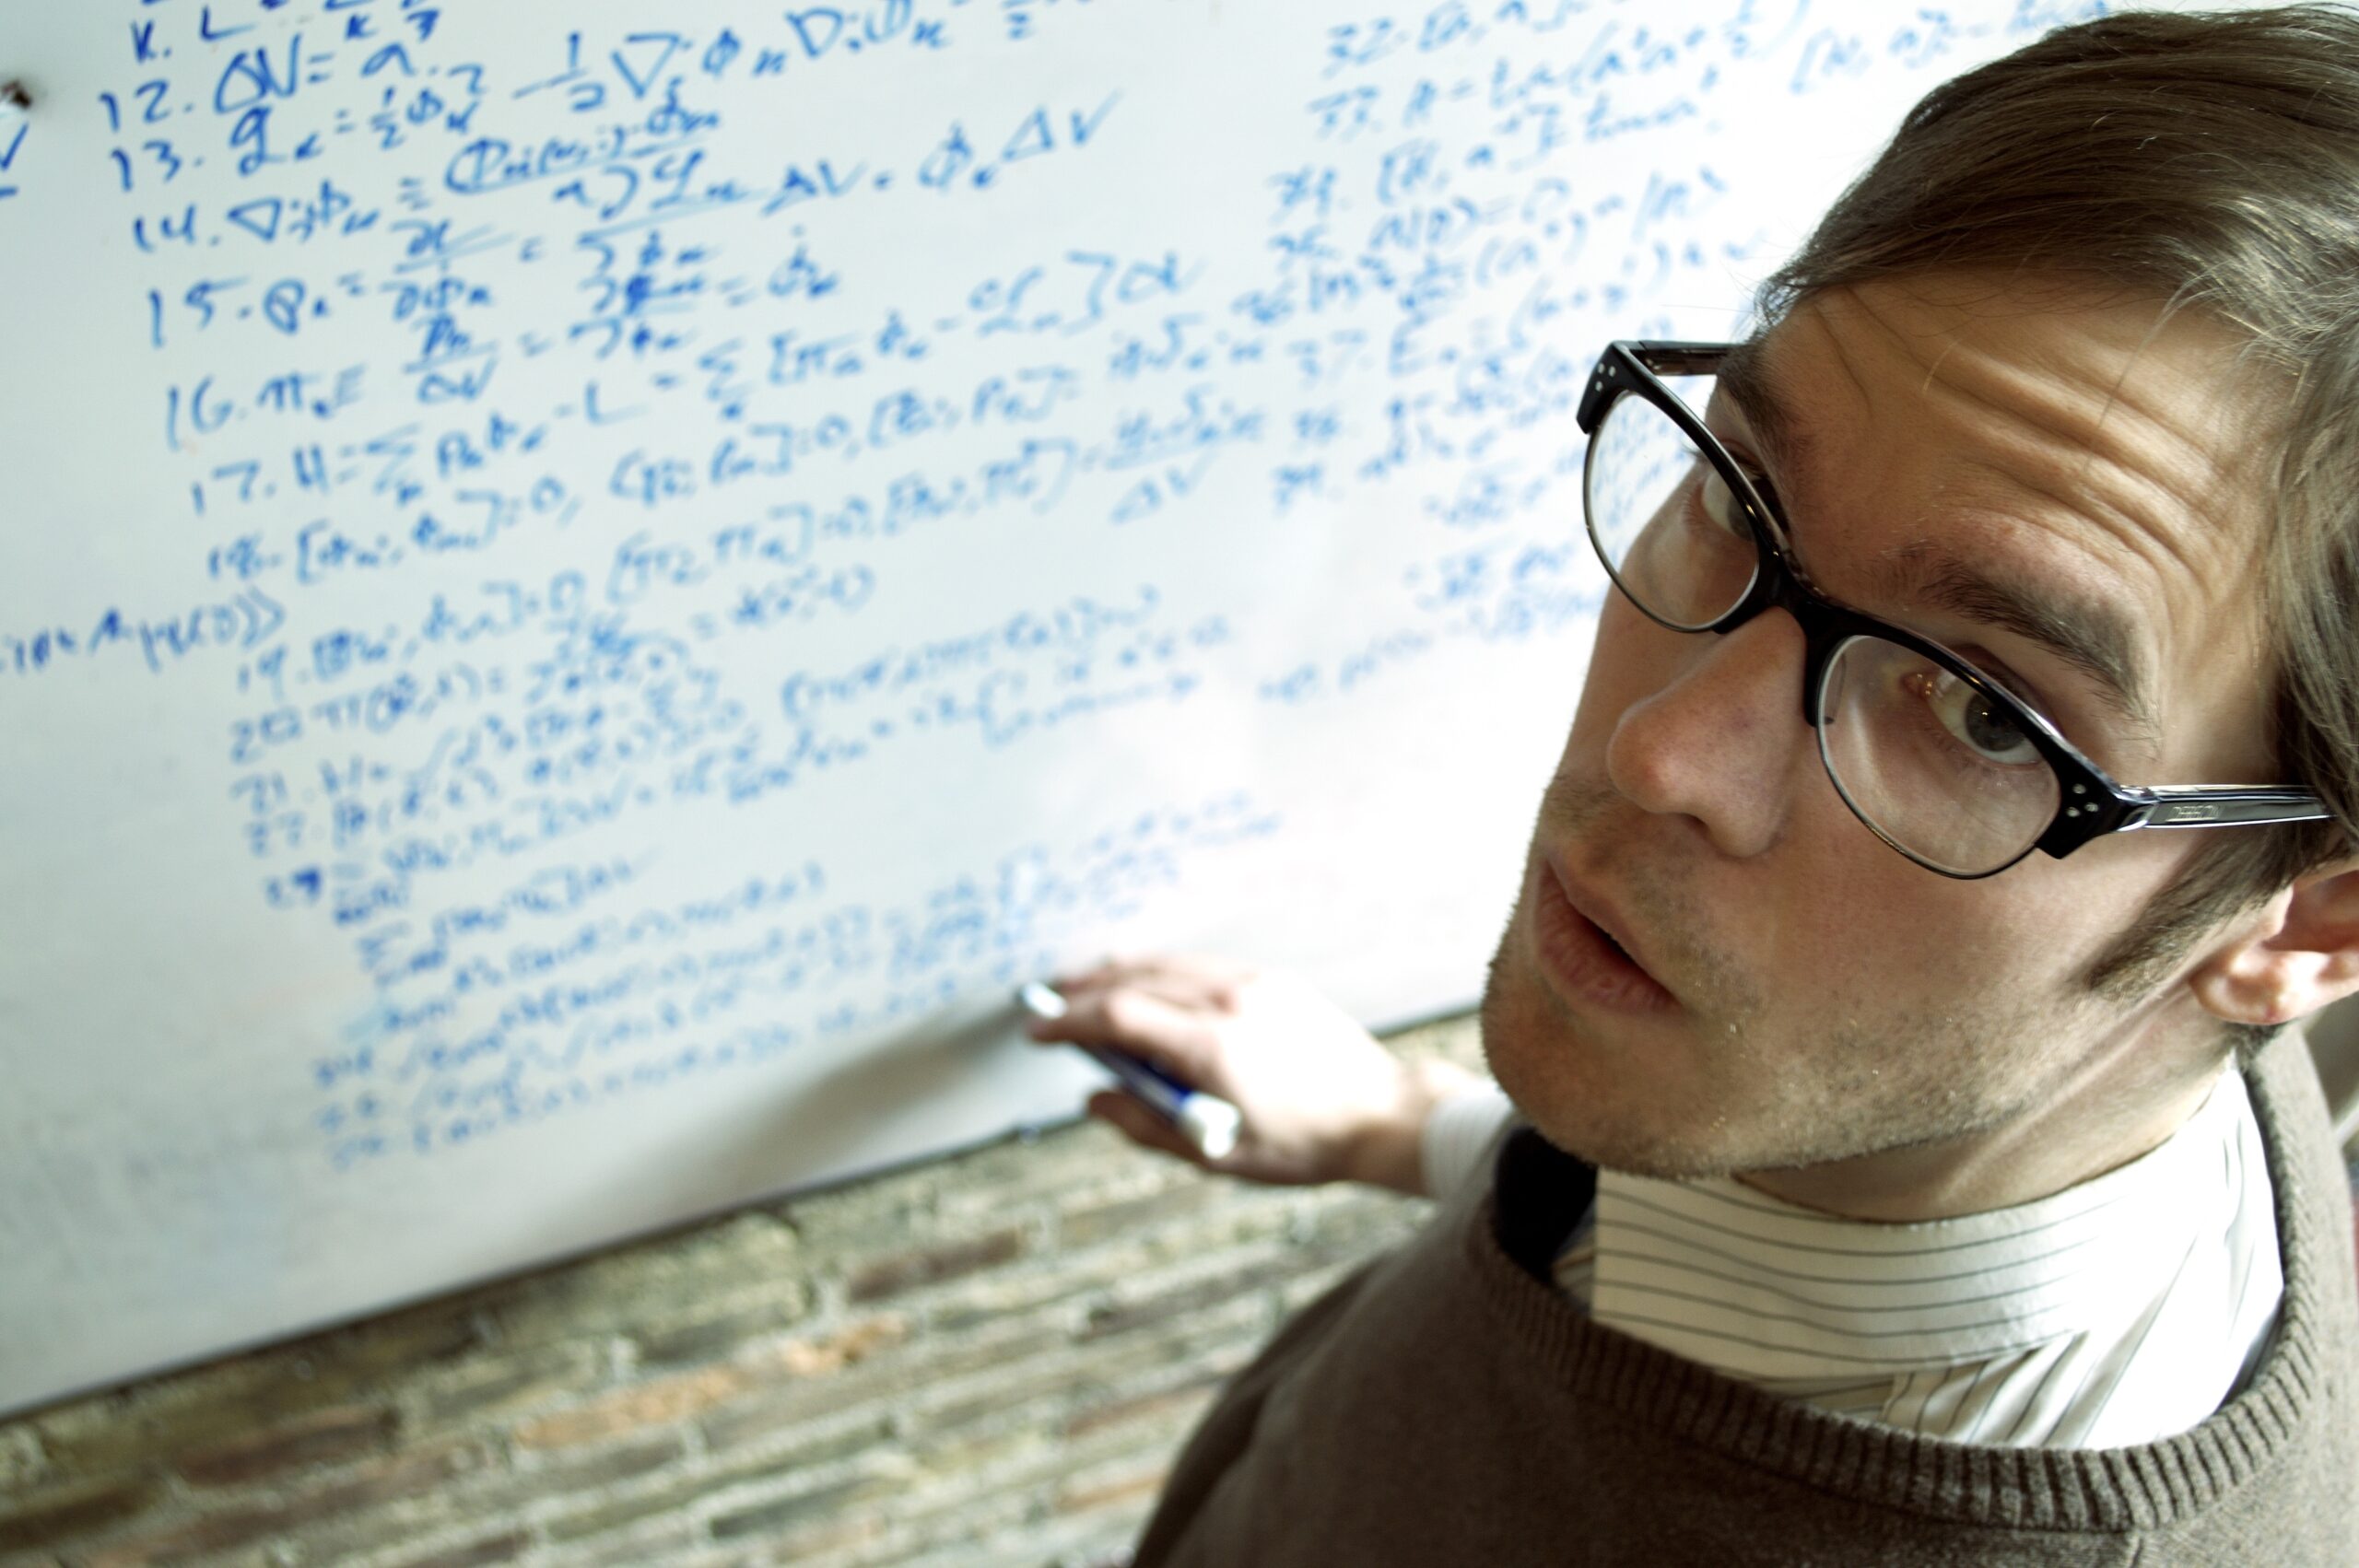 Person with glasses staring up at camera, writing equations on whiteboard in background